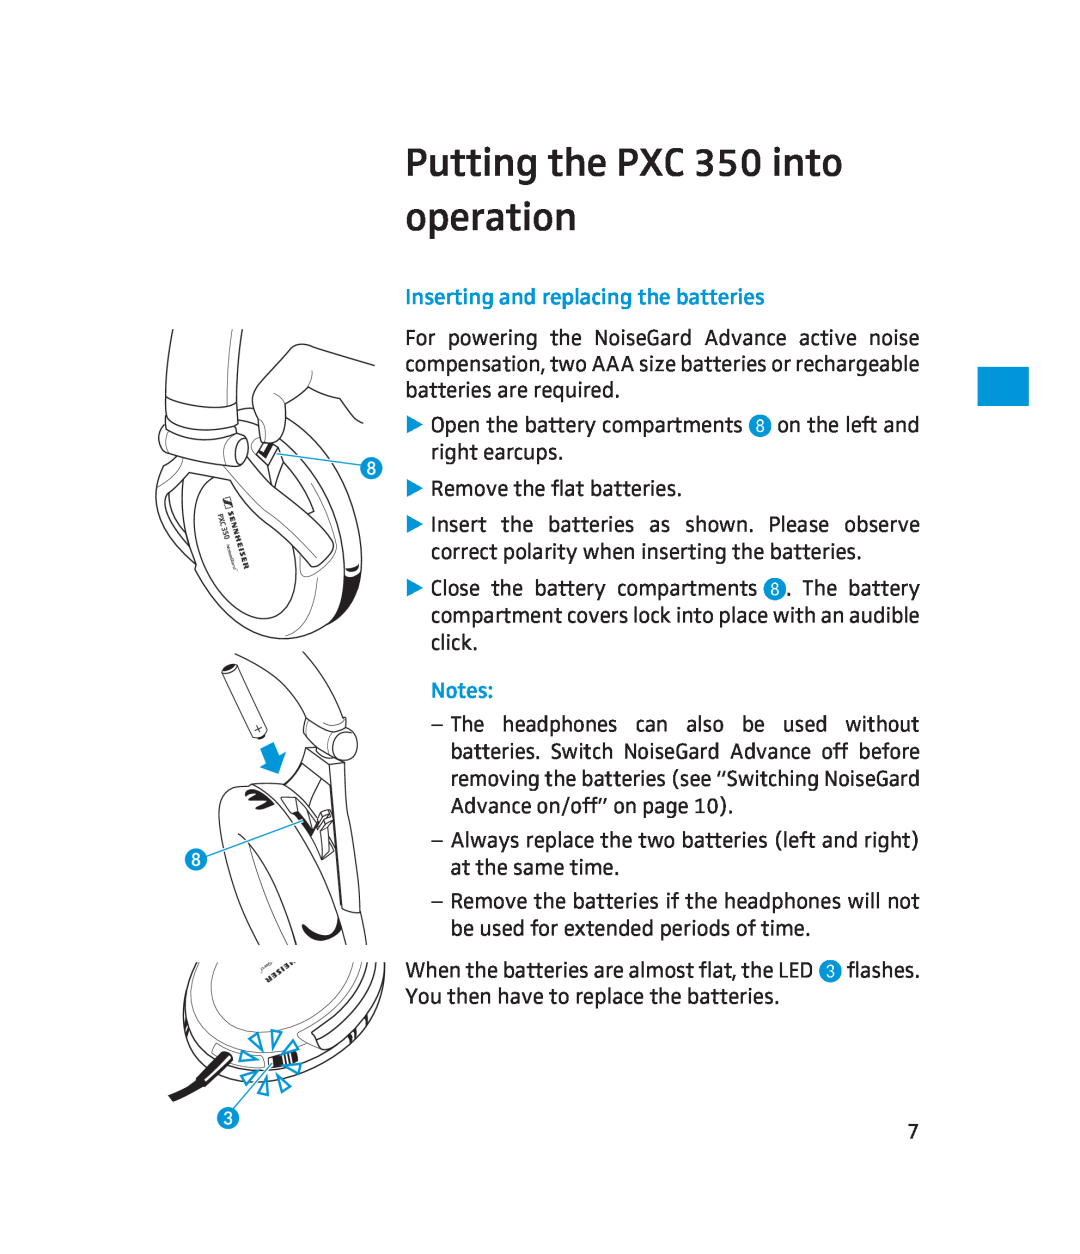 Sennheiser 500371 instruction manual Putting the PXC 350 into operation, Inserting and replacing the batteries 